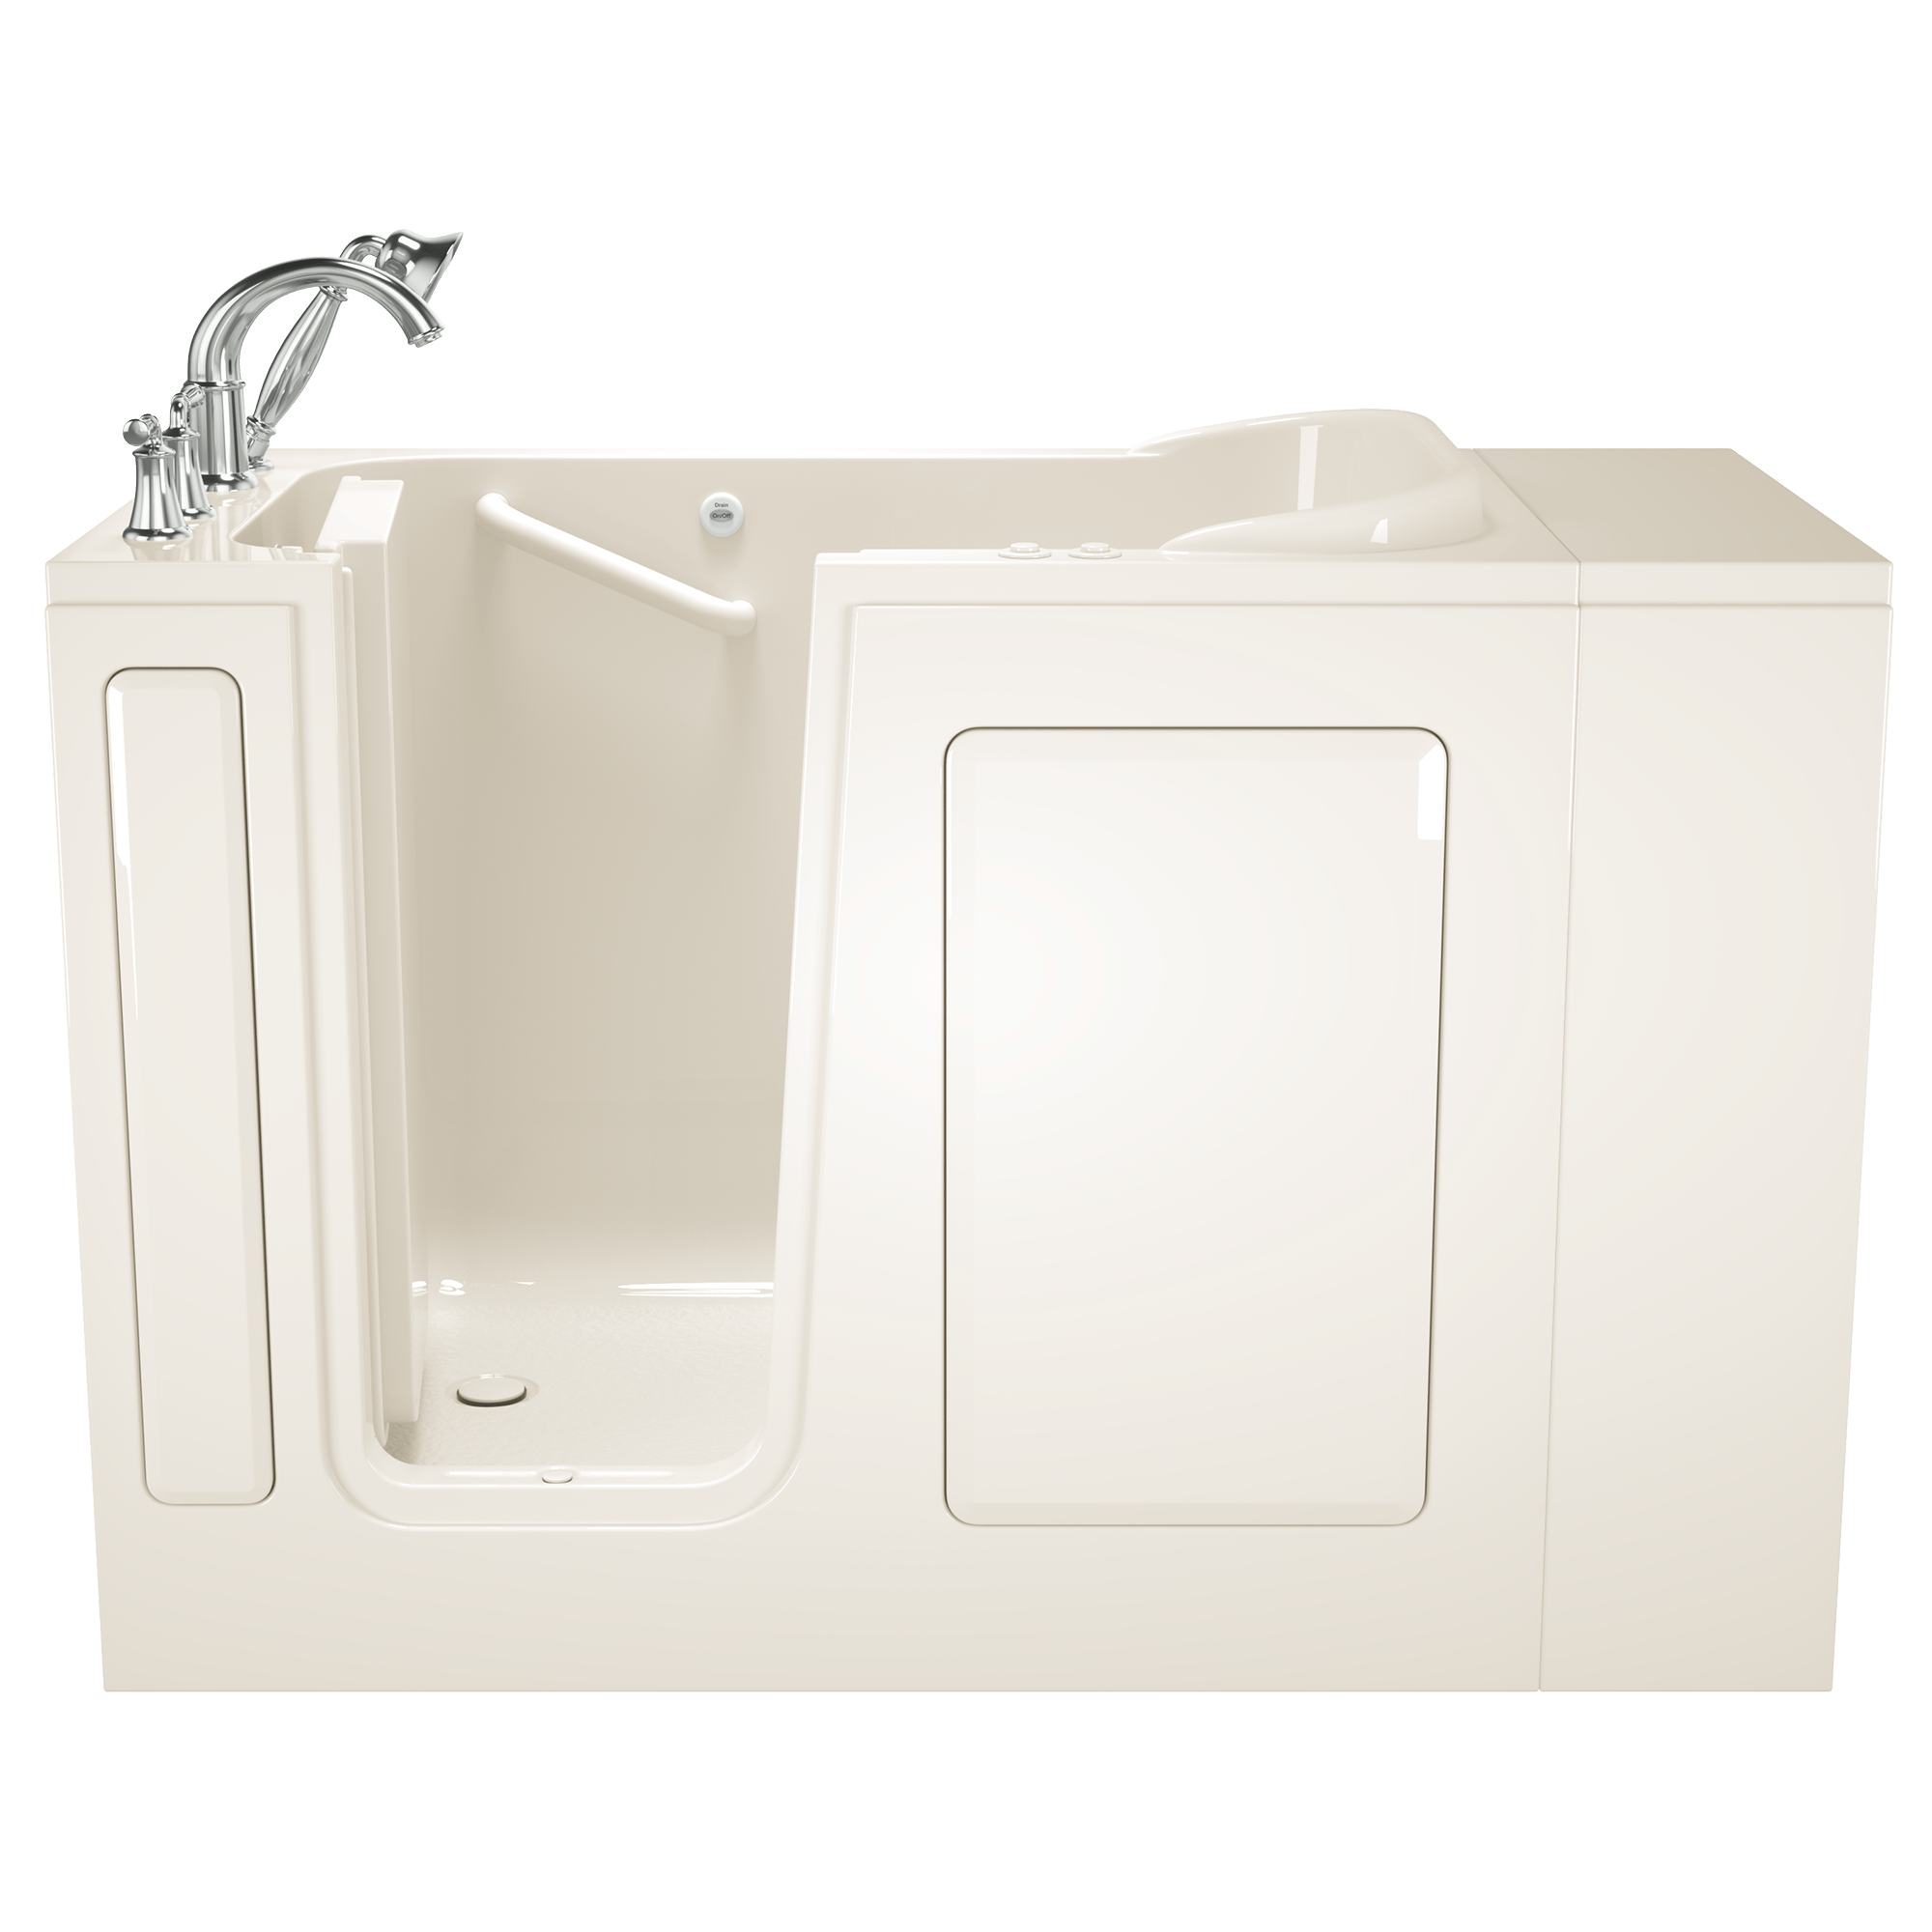 Gelcoat 28x48-Inch Walk-in Bathtub with Combination Air Spa and Whirlpool System  Left Hand Door and Drain